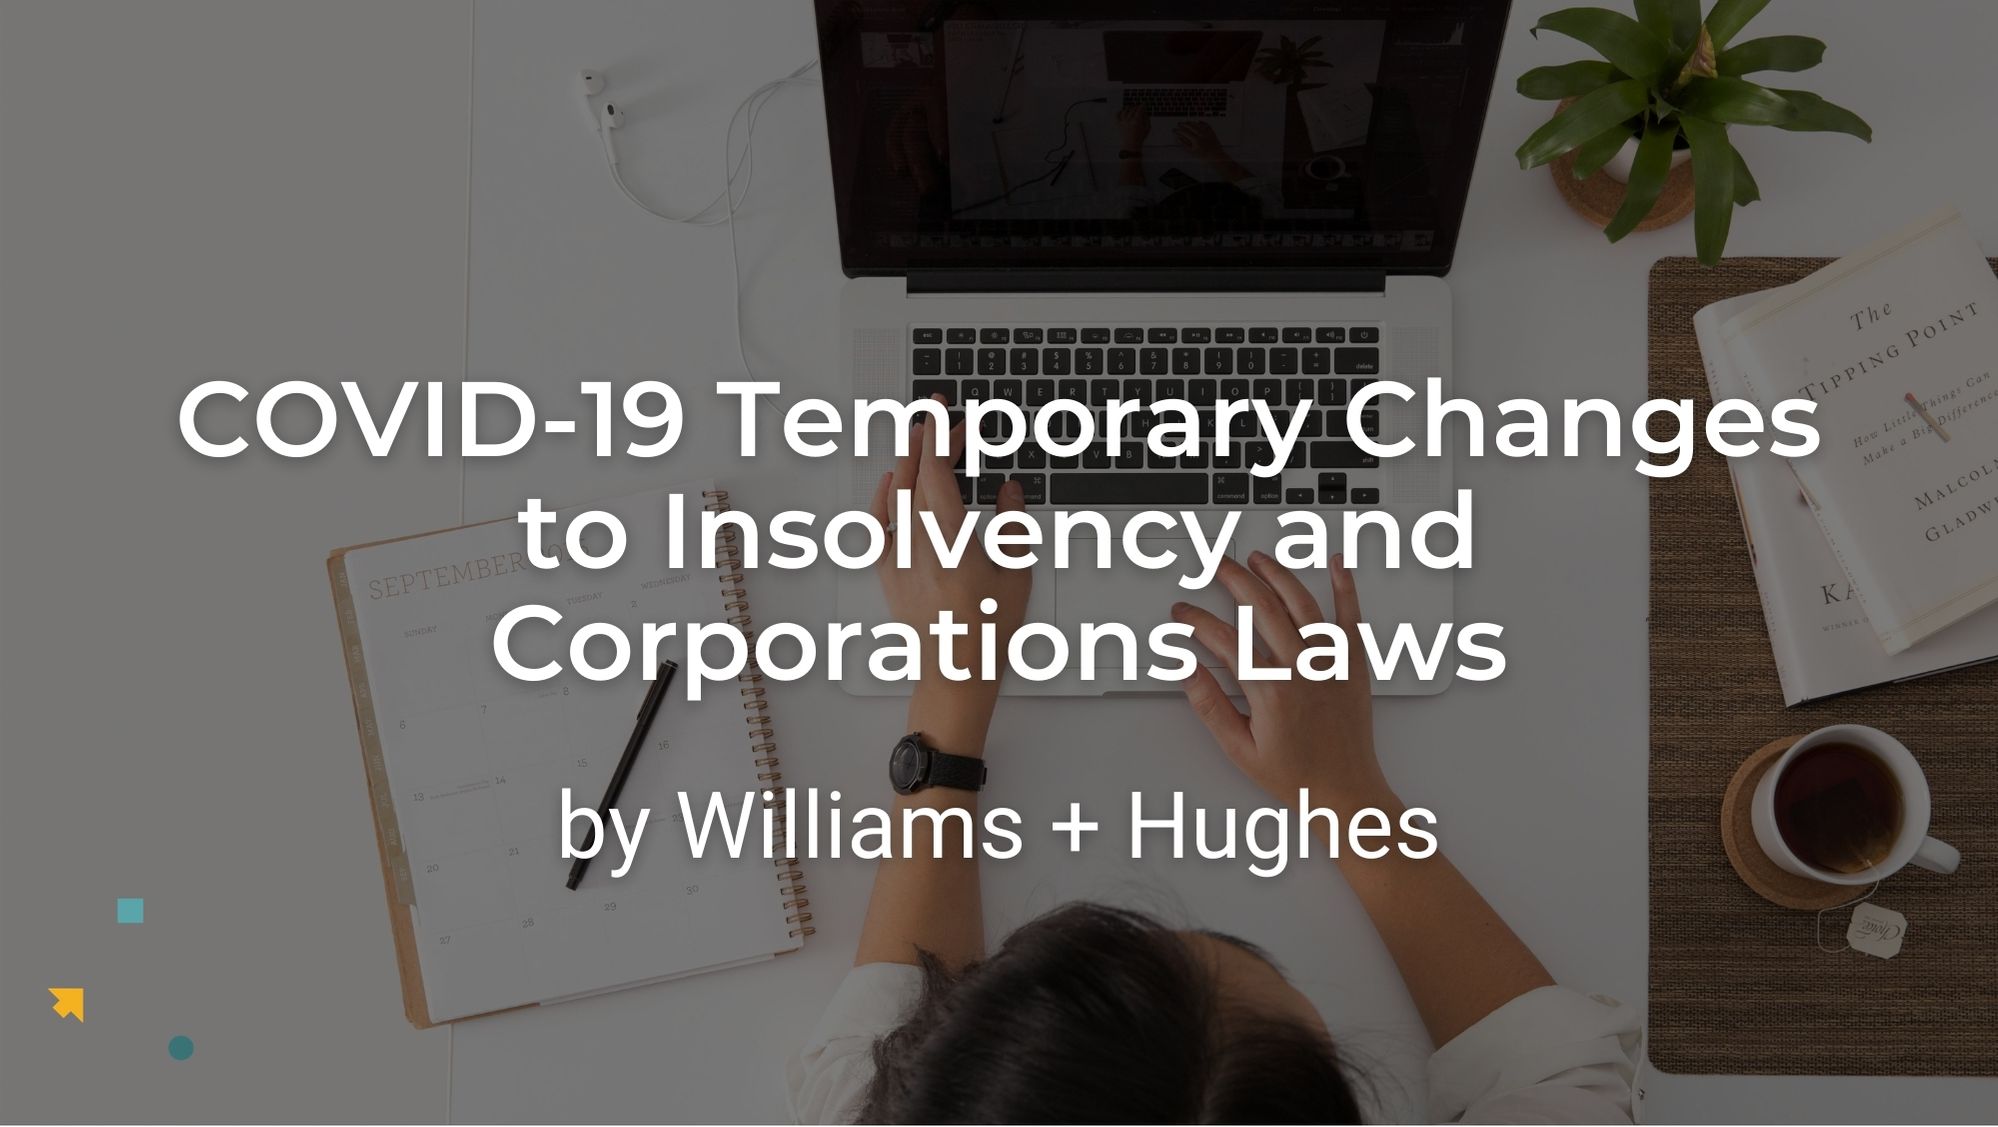 COVID-19 Temporary changes to insolvency and corporations laws